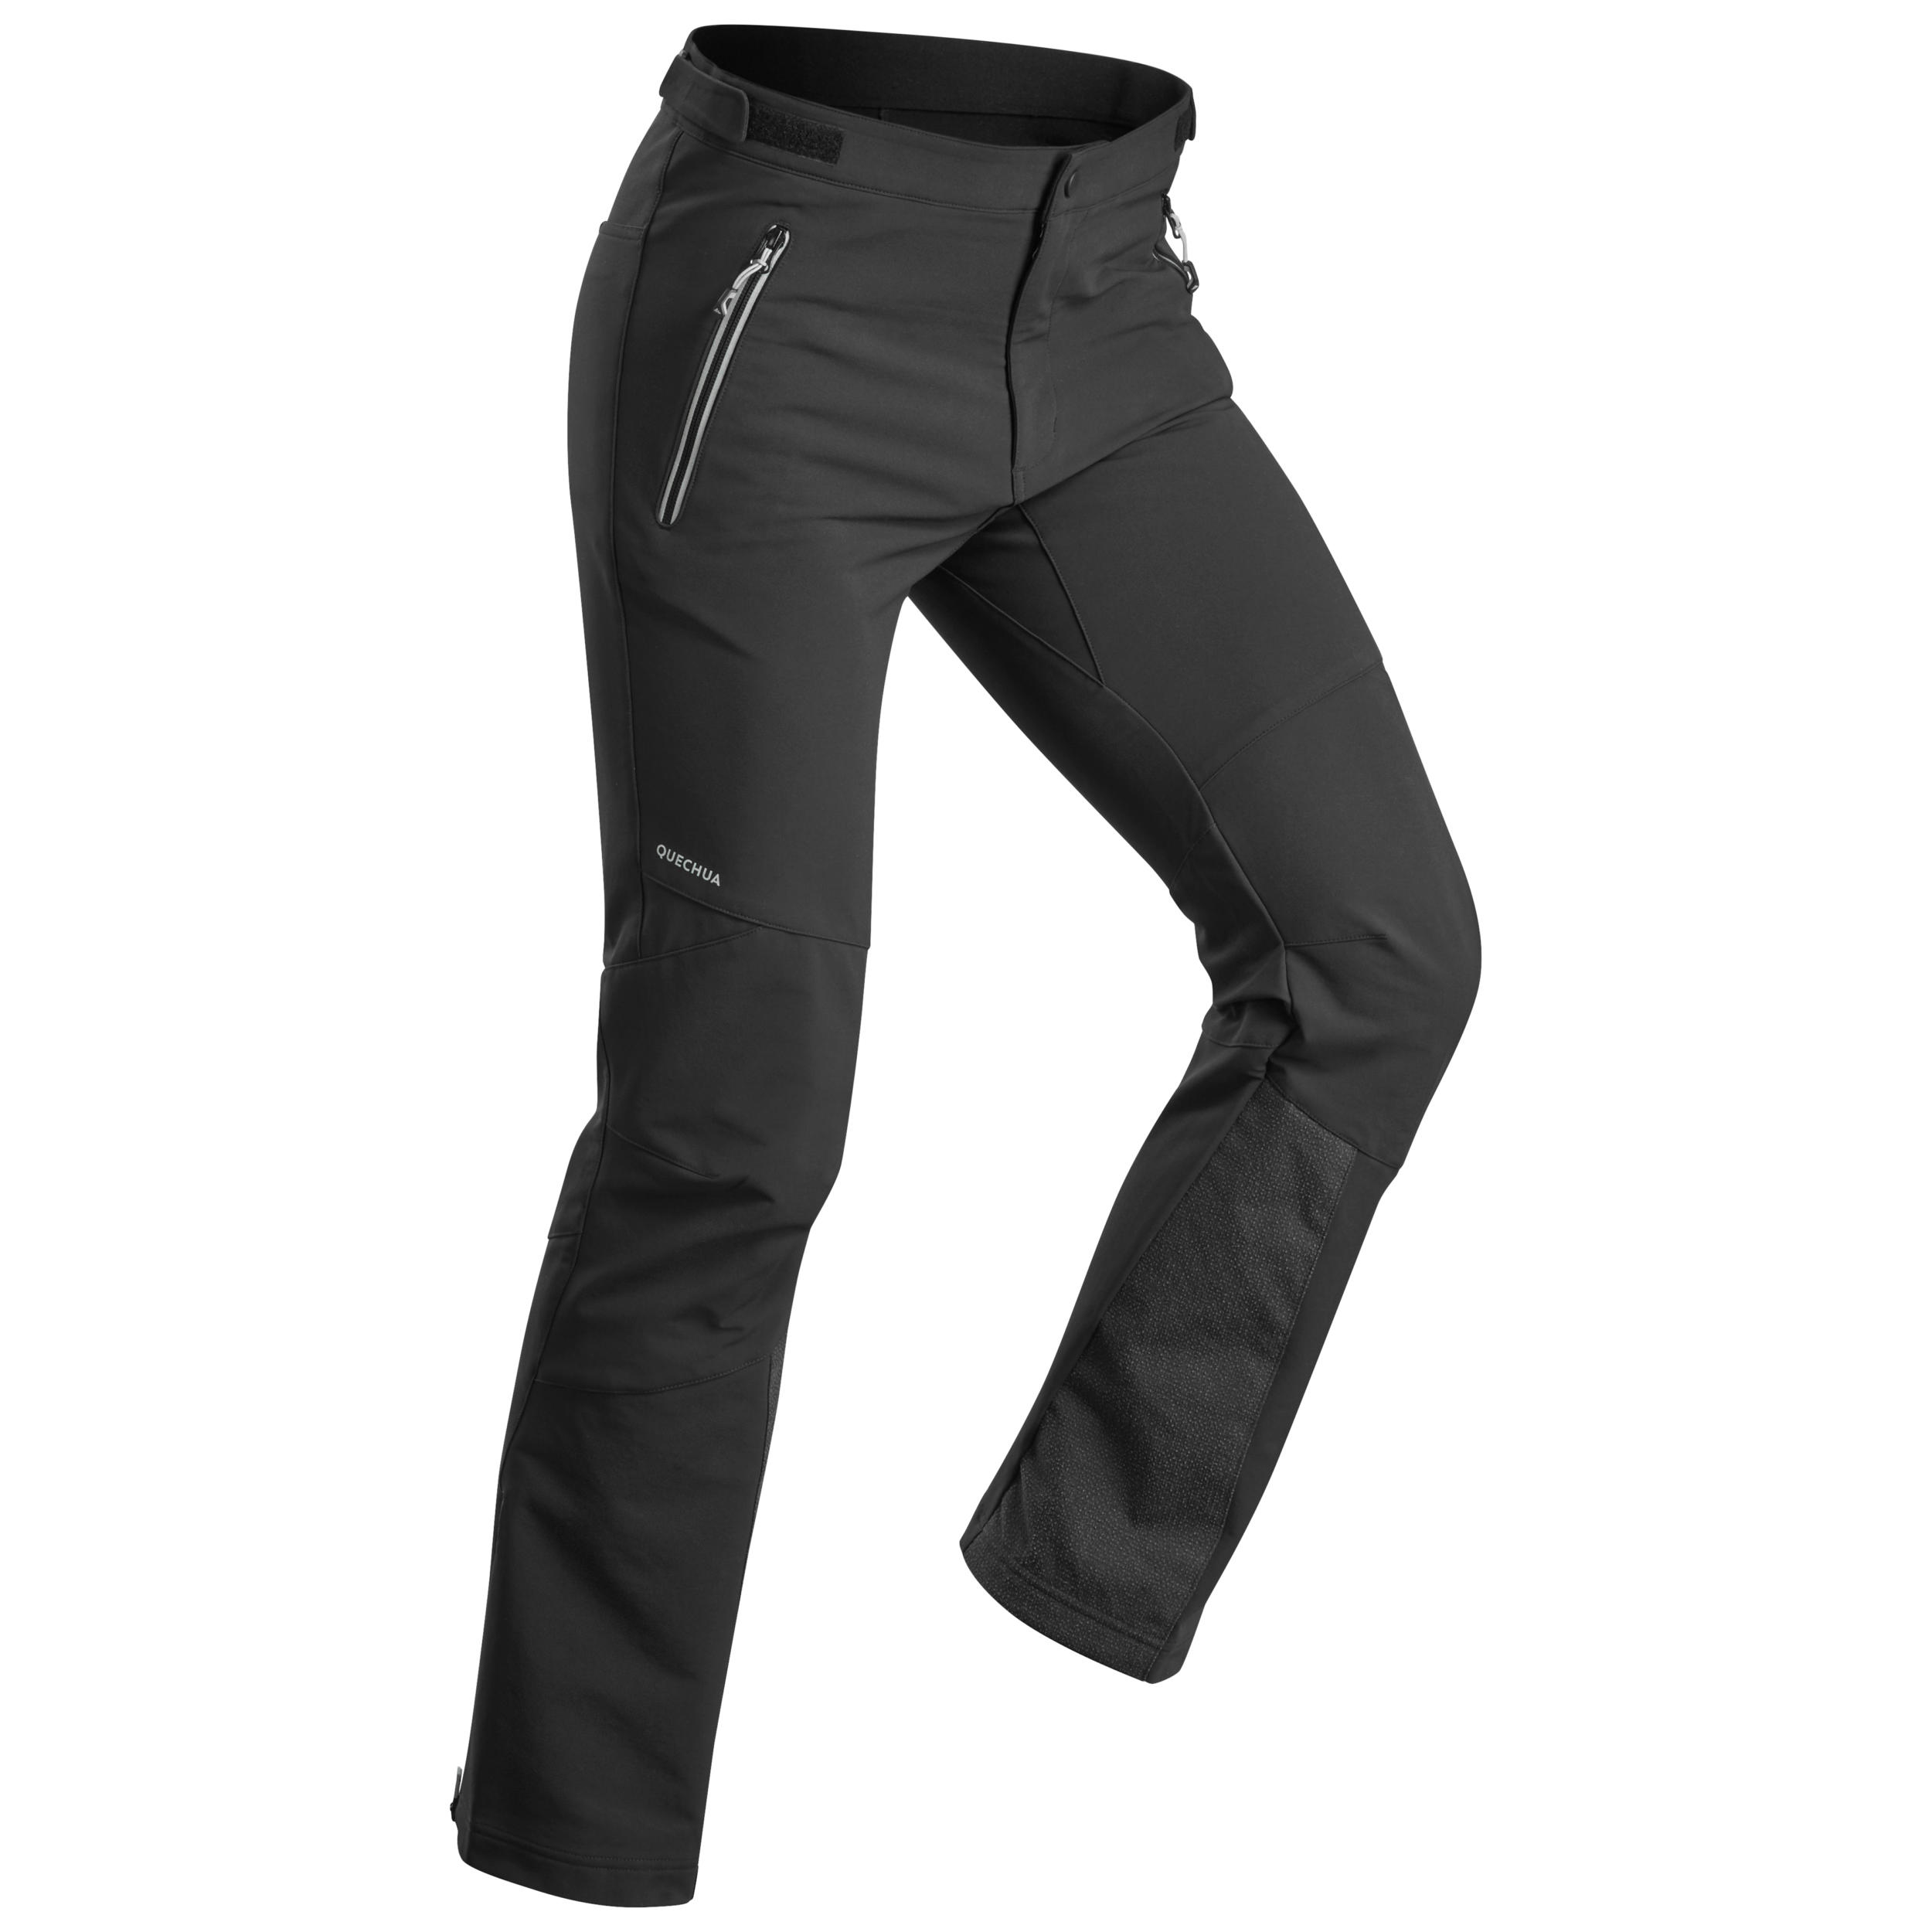 Men's Warm Water-repellent Ventilated Hiking Trousers - SH500 MOUNTAIN  VENTIL - Decathlon